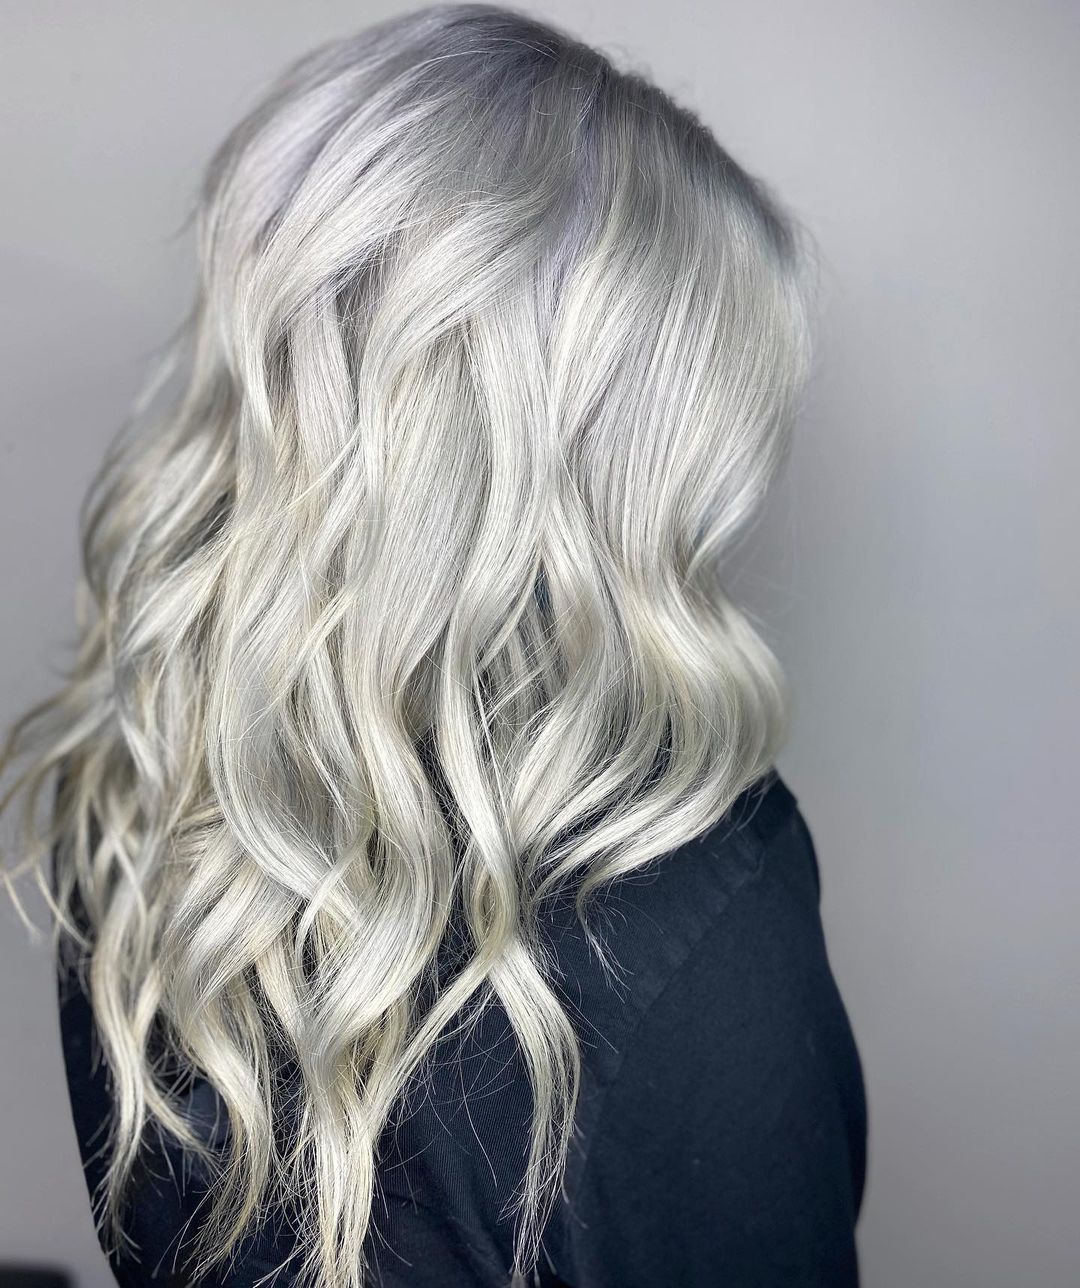 44 Examples That Prove White Blonde Hair Is In for 2023